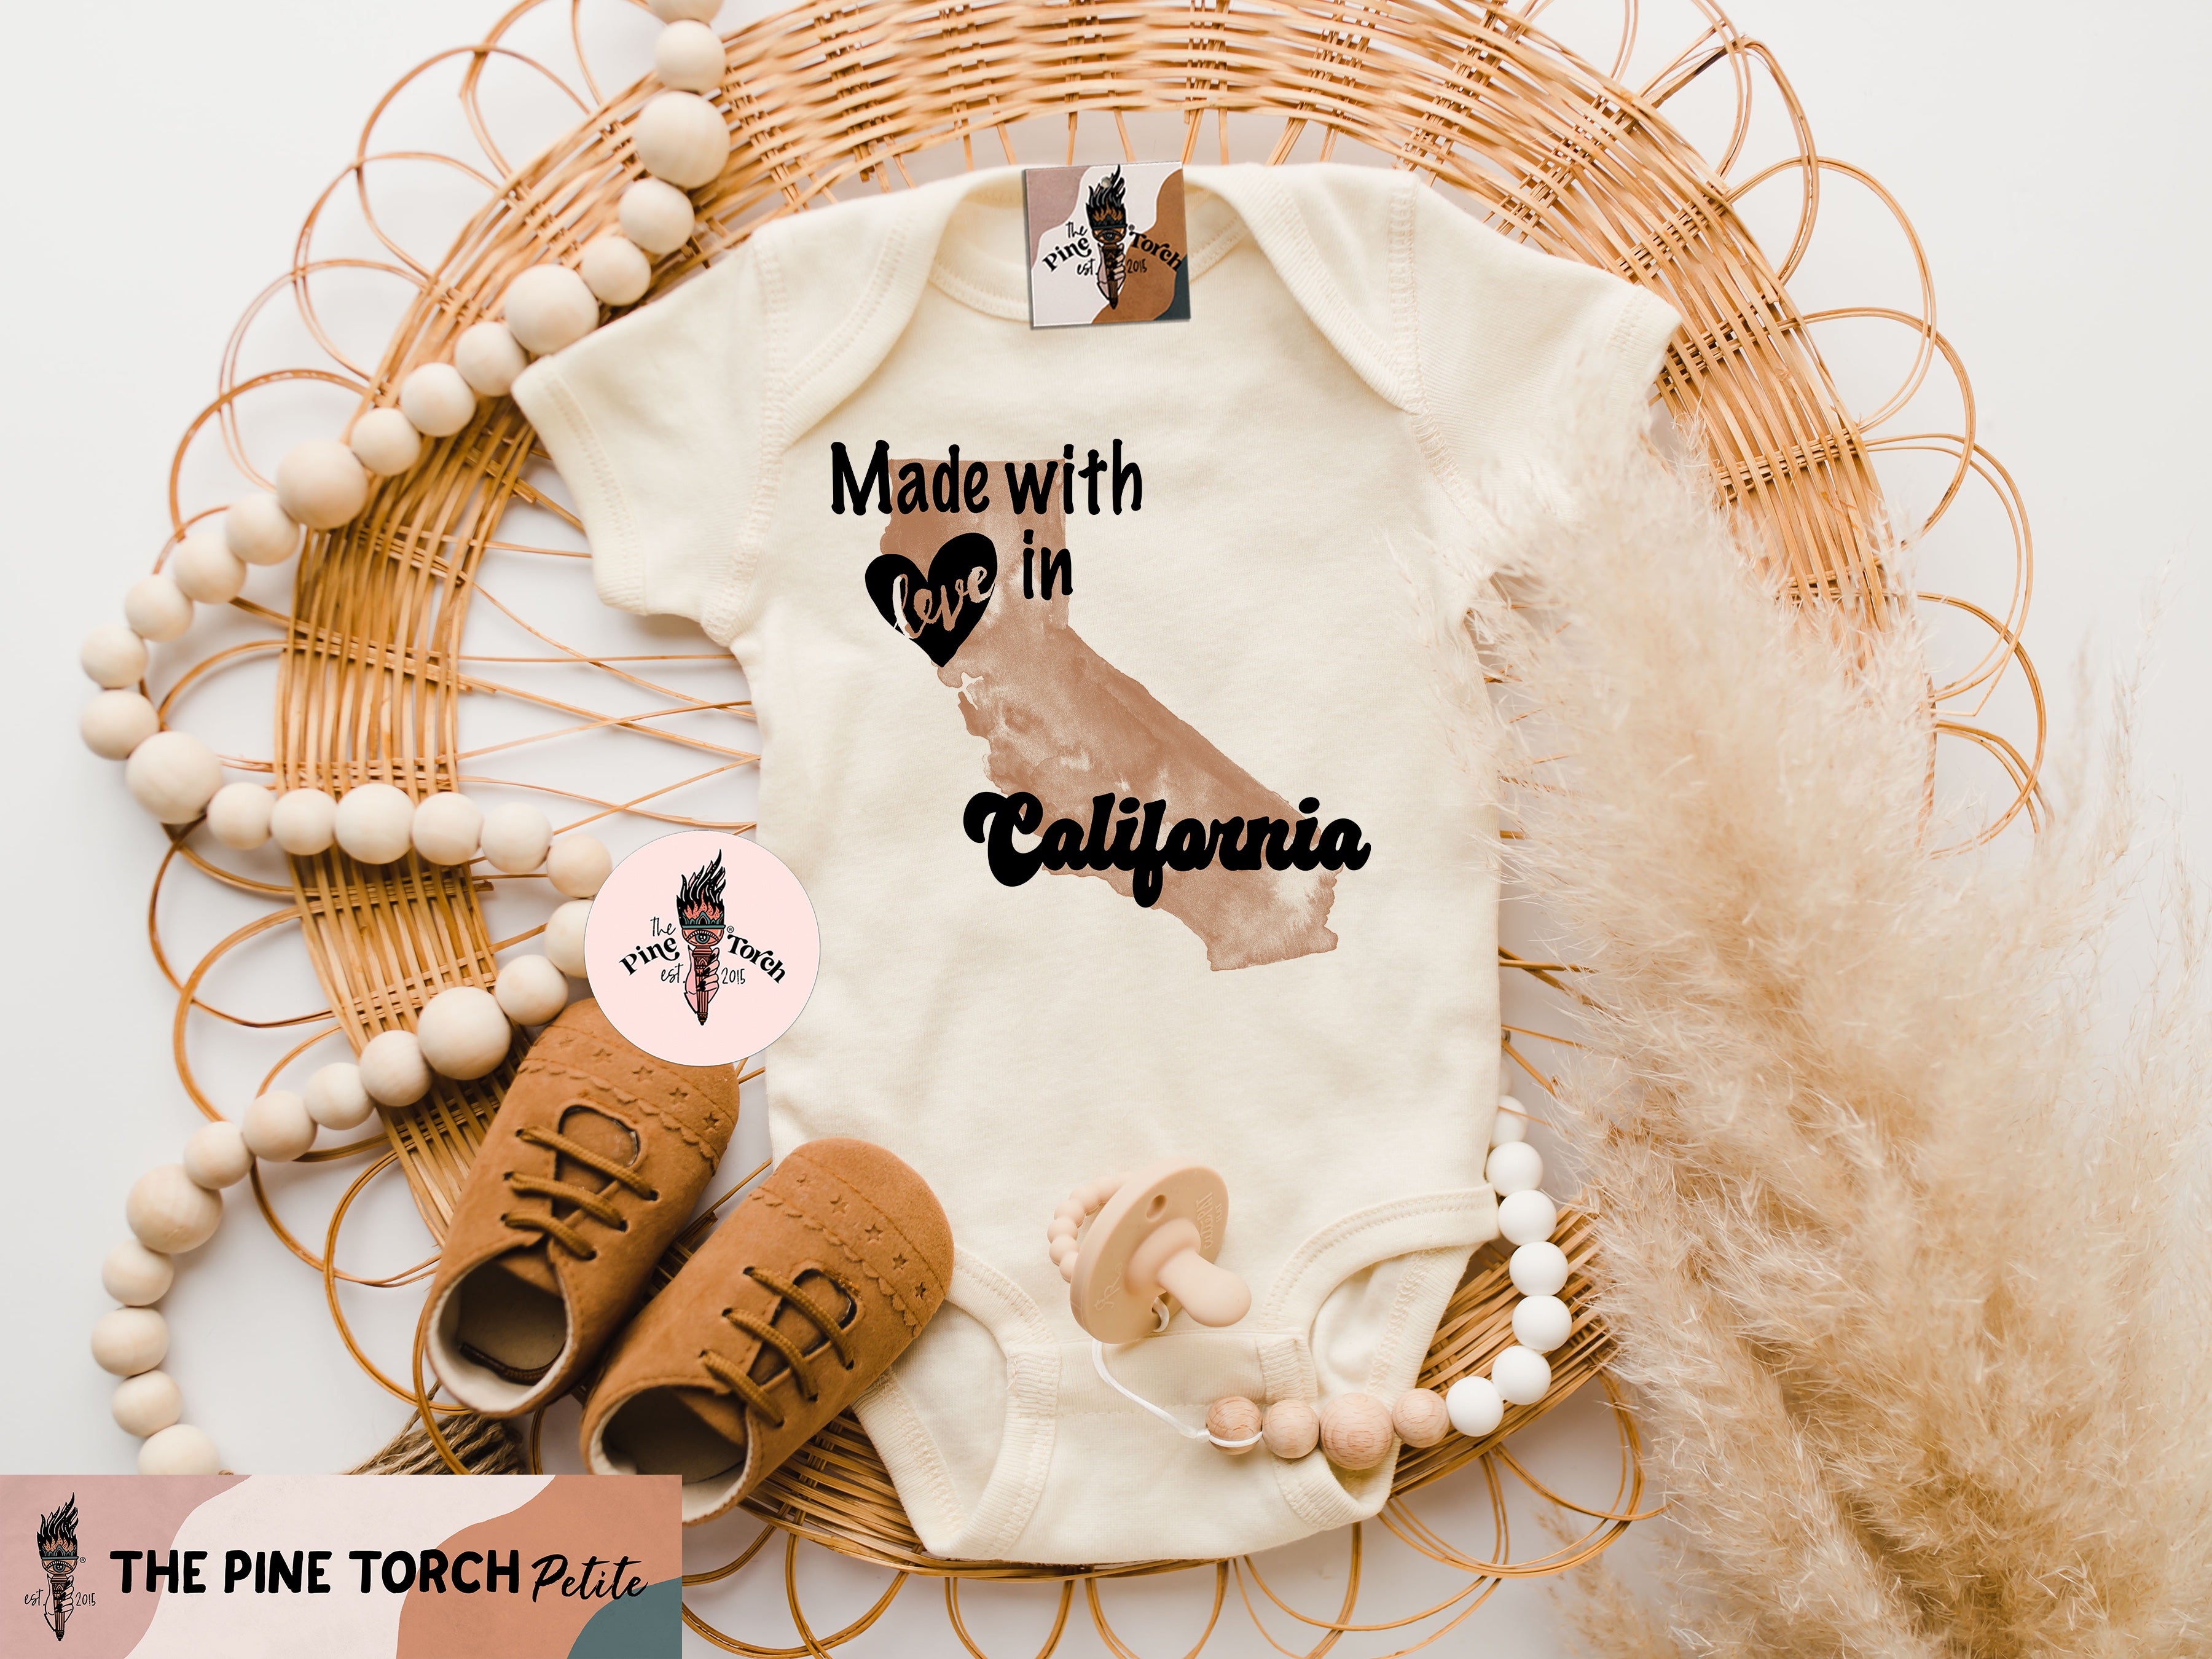 « MADE WITH LOVE IN CALIFORNIA » BODYSUIT